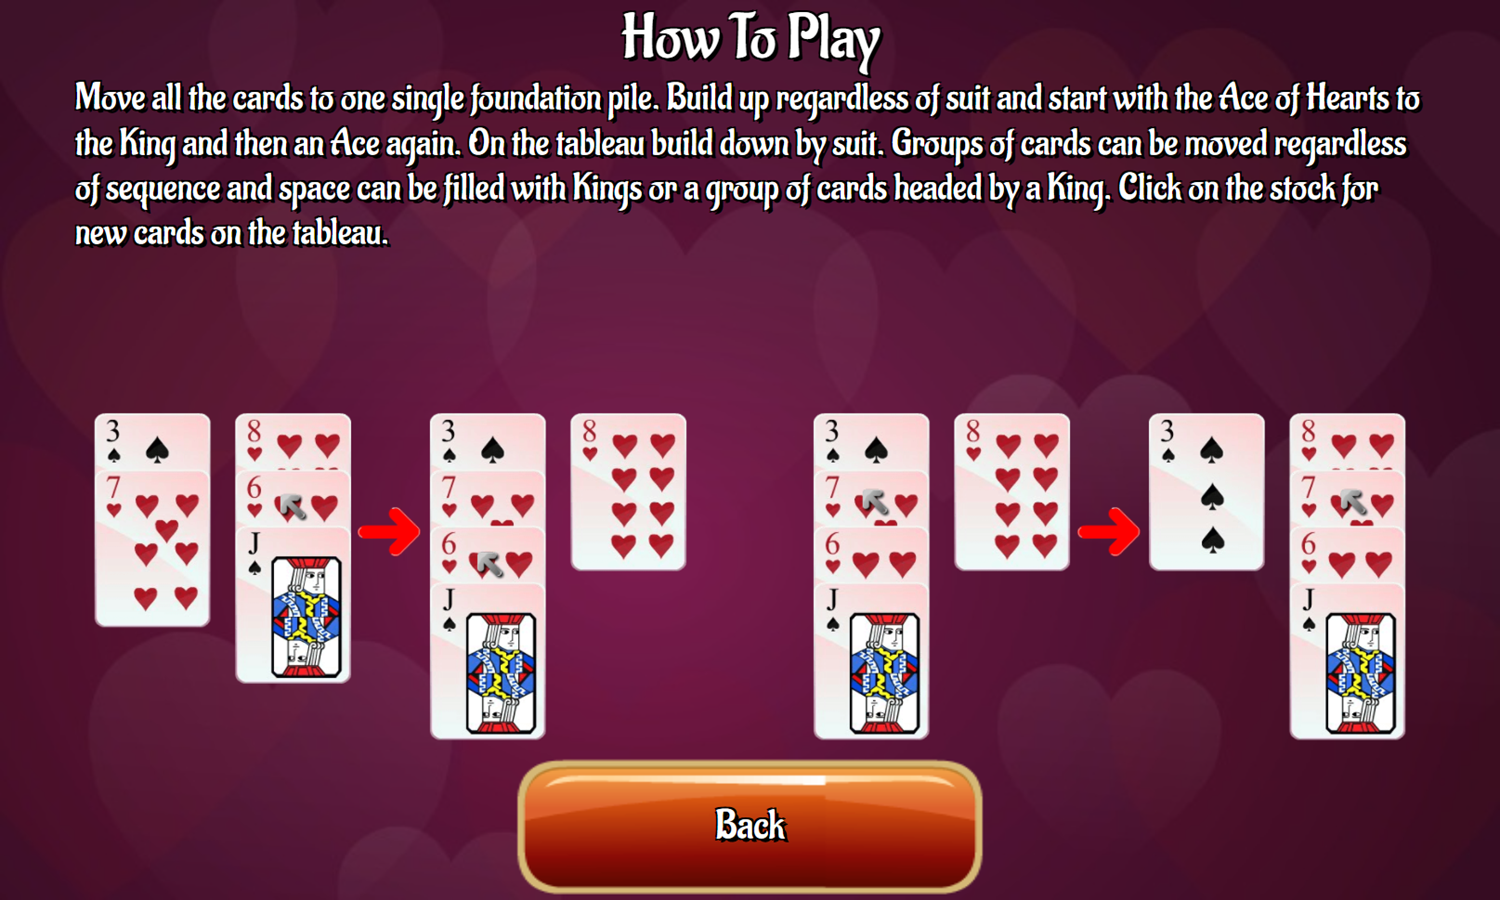 Ace of Hearts Game How To Play Screenshot.